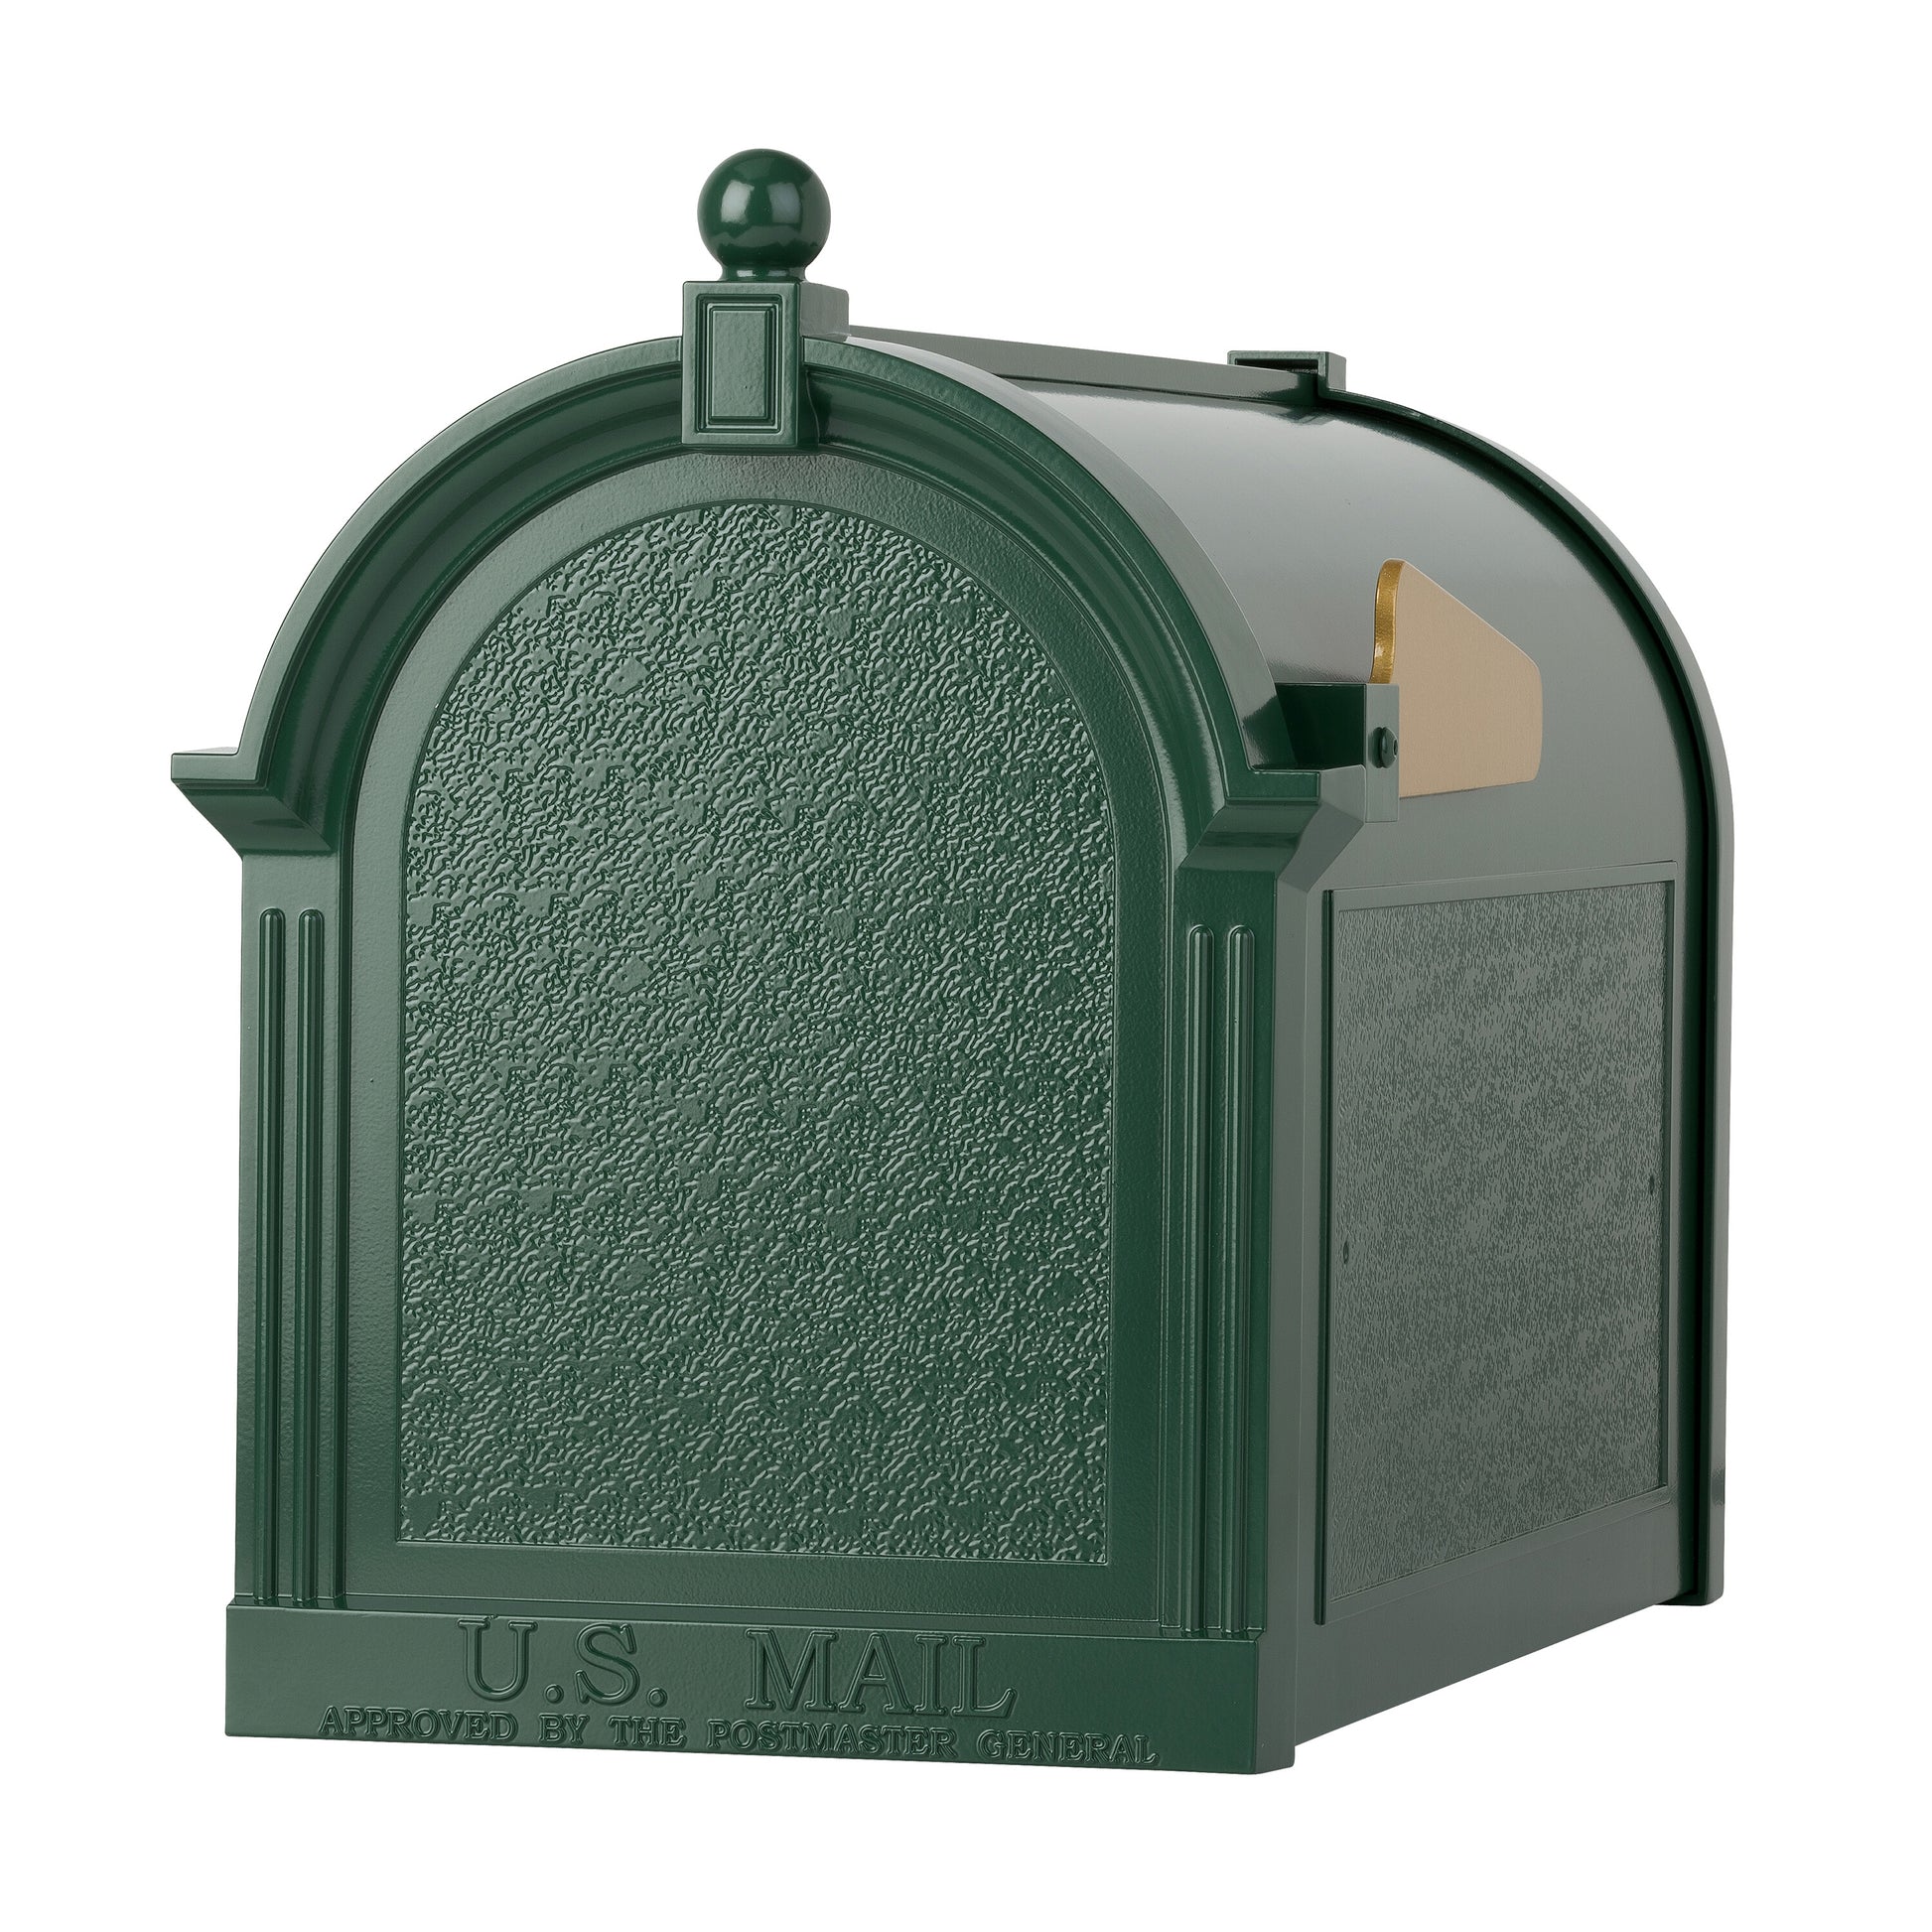 Whitehall Products Capitol Mailbox Green